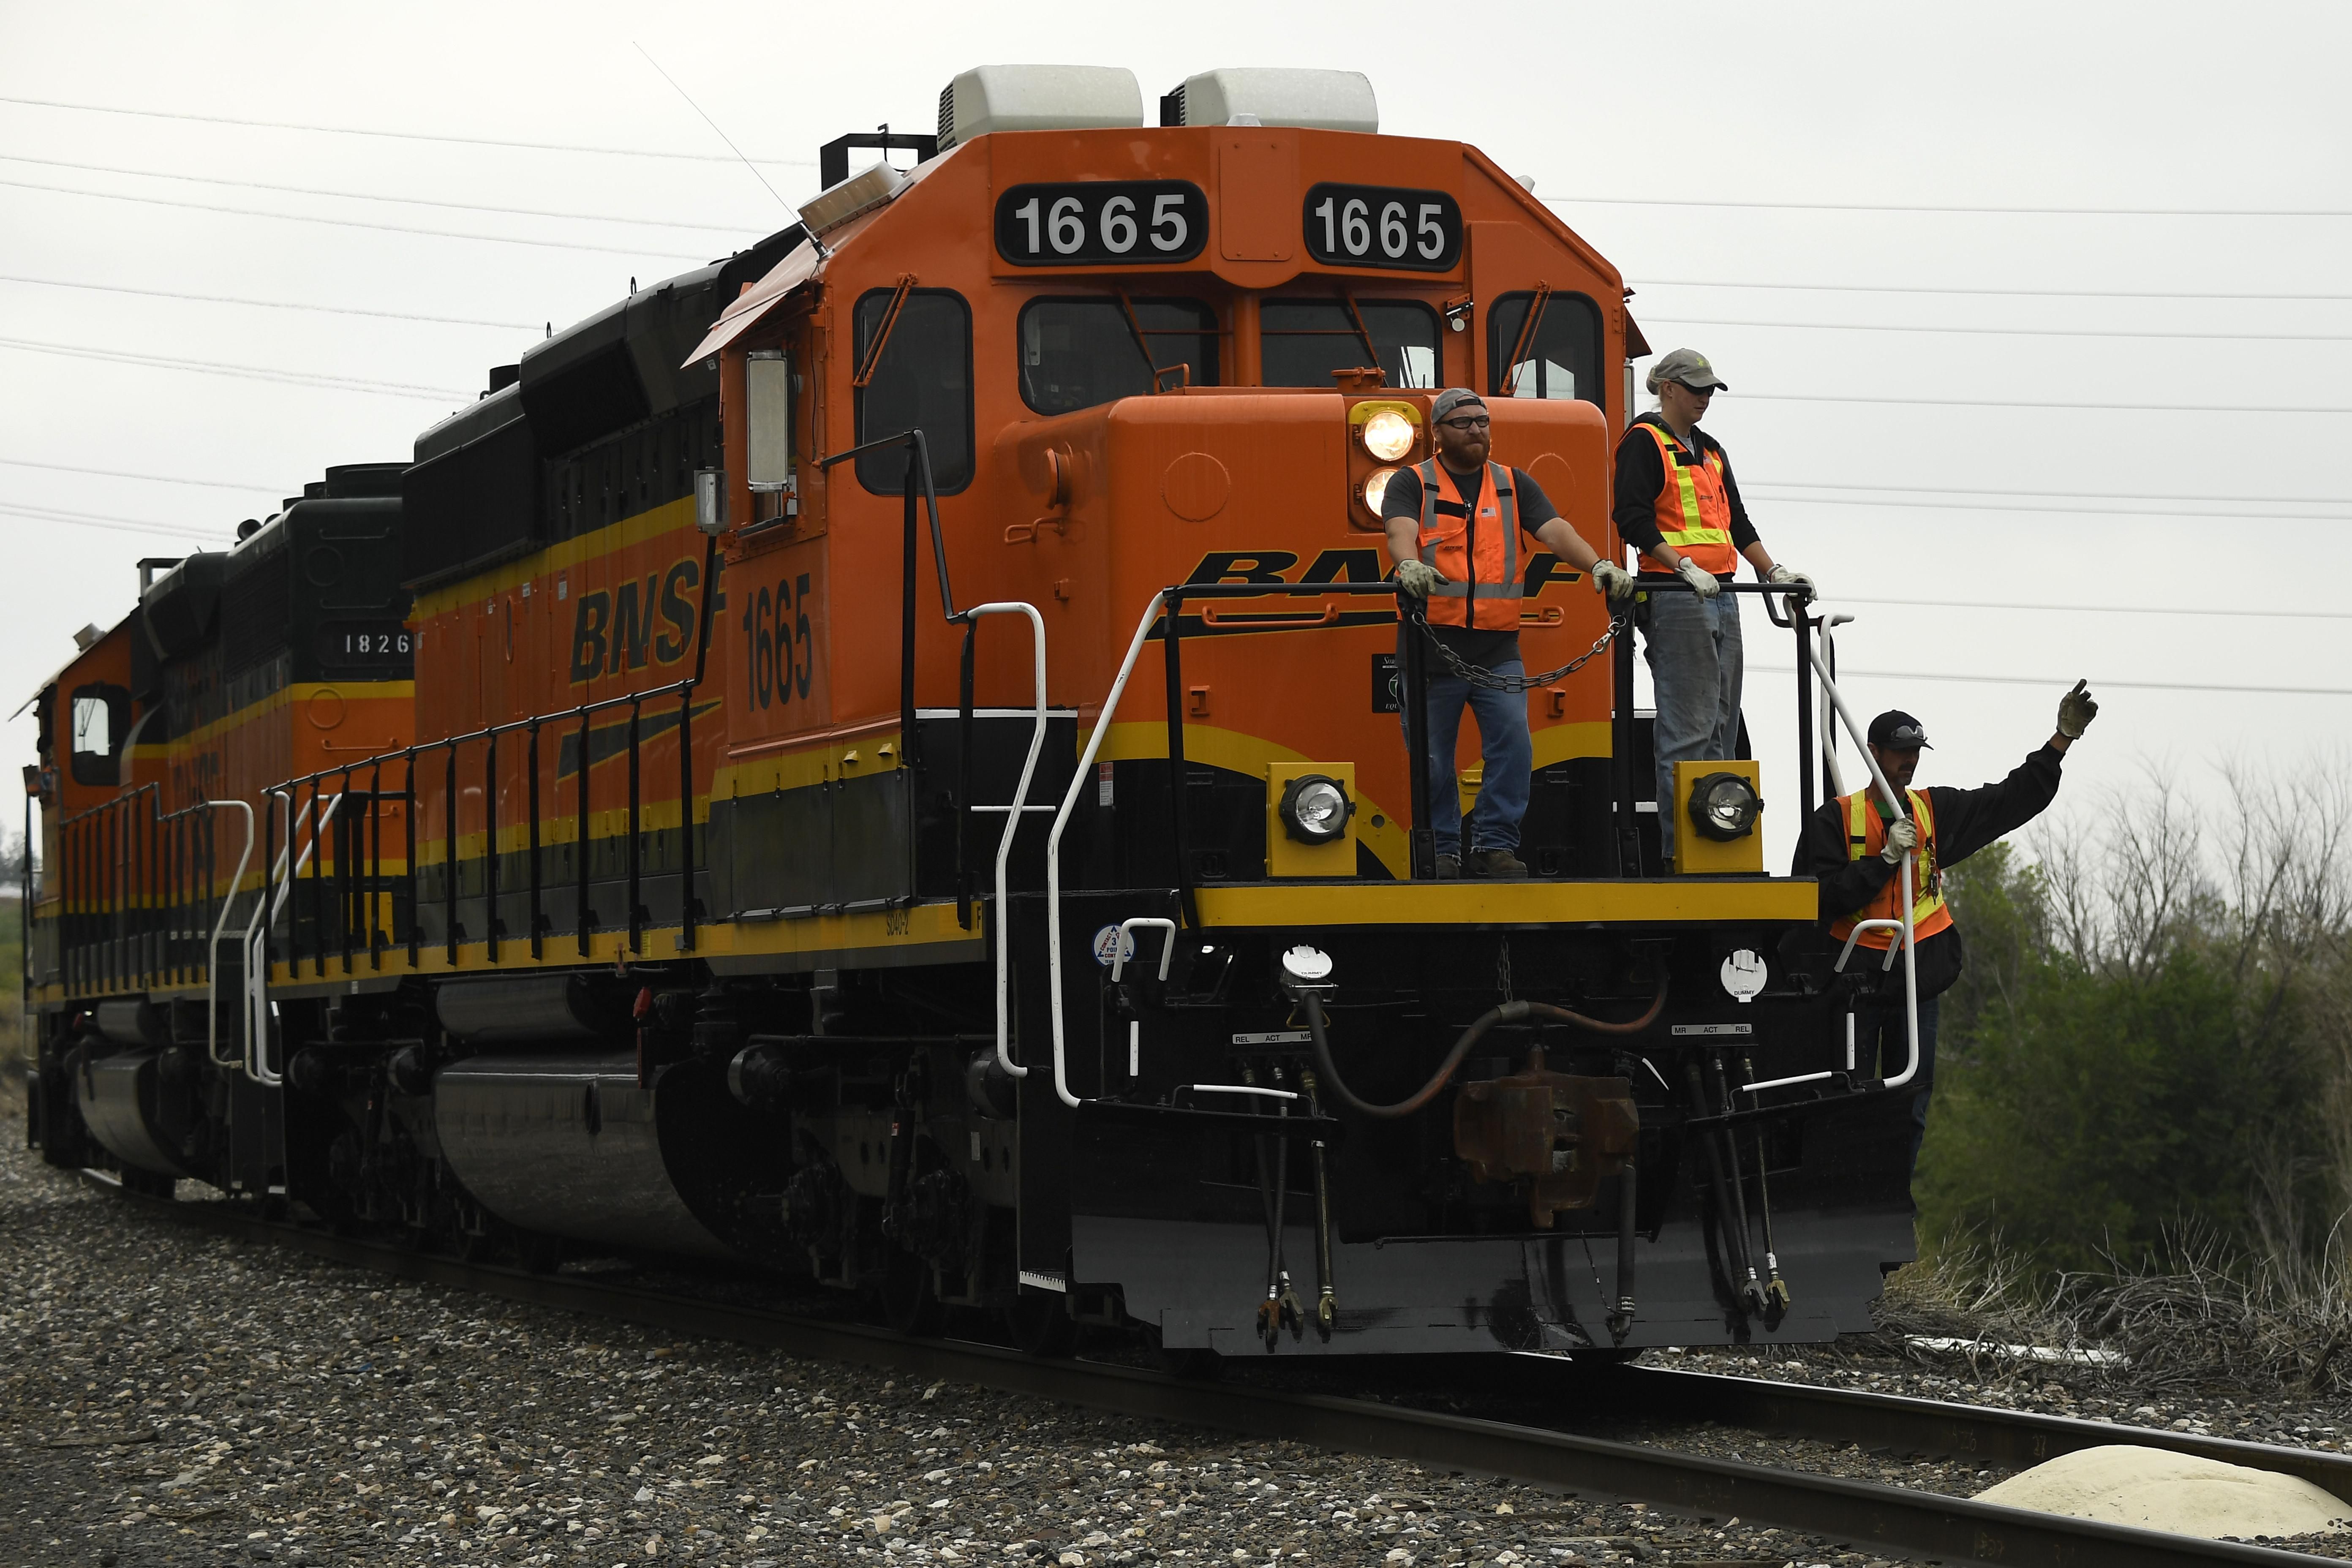 BNSF workers arrive in Golden, Colorado on August 22, 2018.